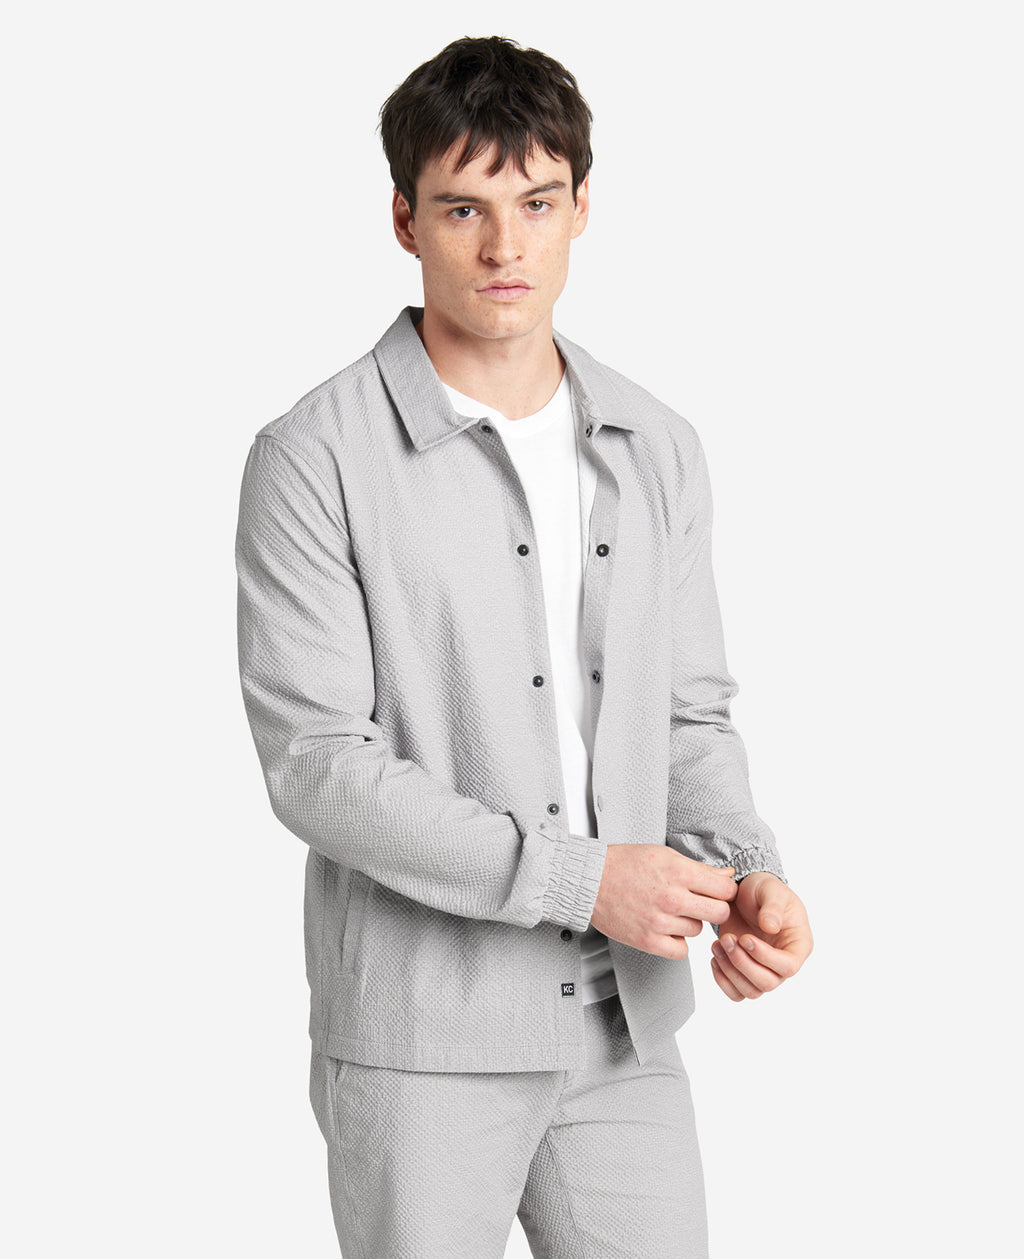 Men's Clothing | Kenneth Cole